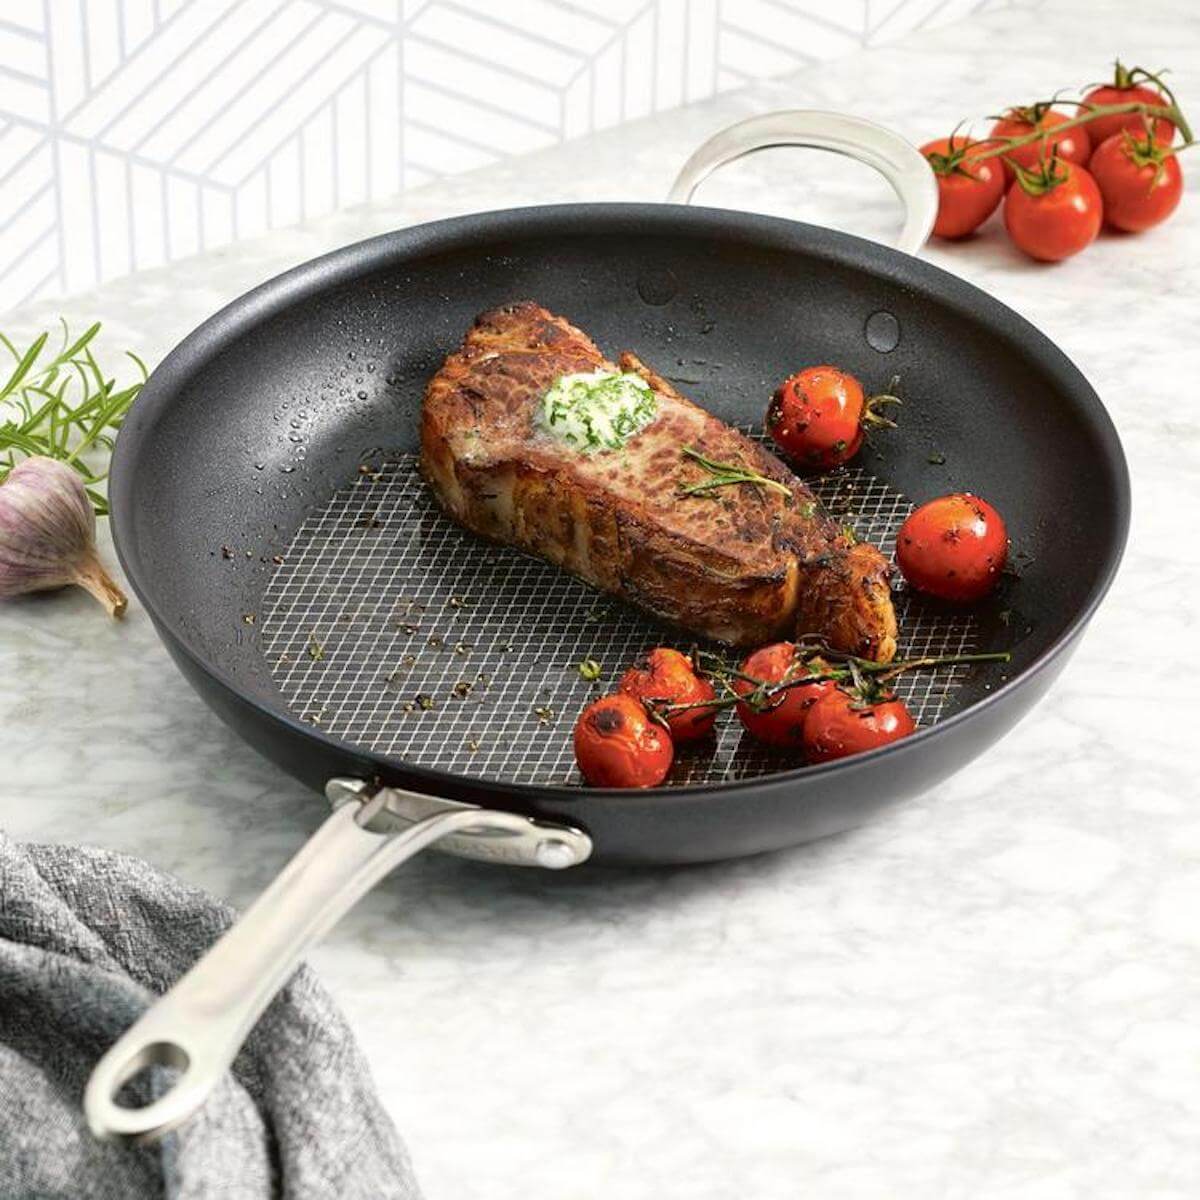 14 Gifts for Cooks Who Have Everything - Clover Meadows Beef